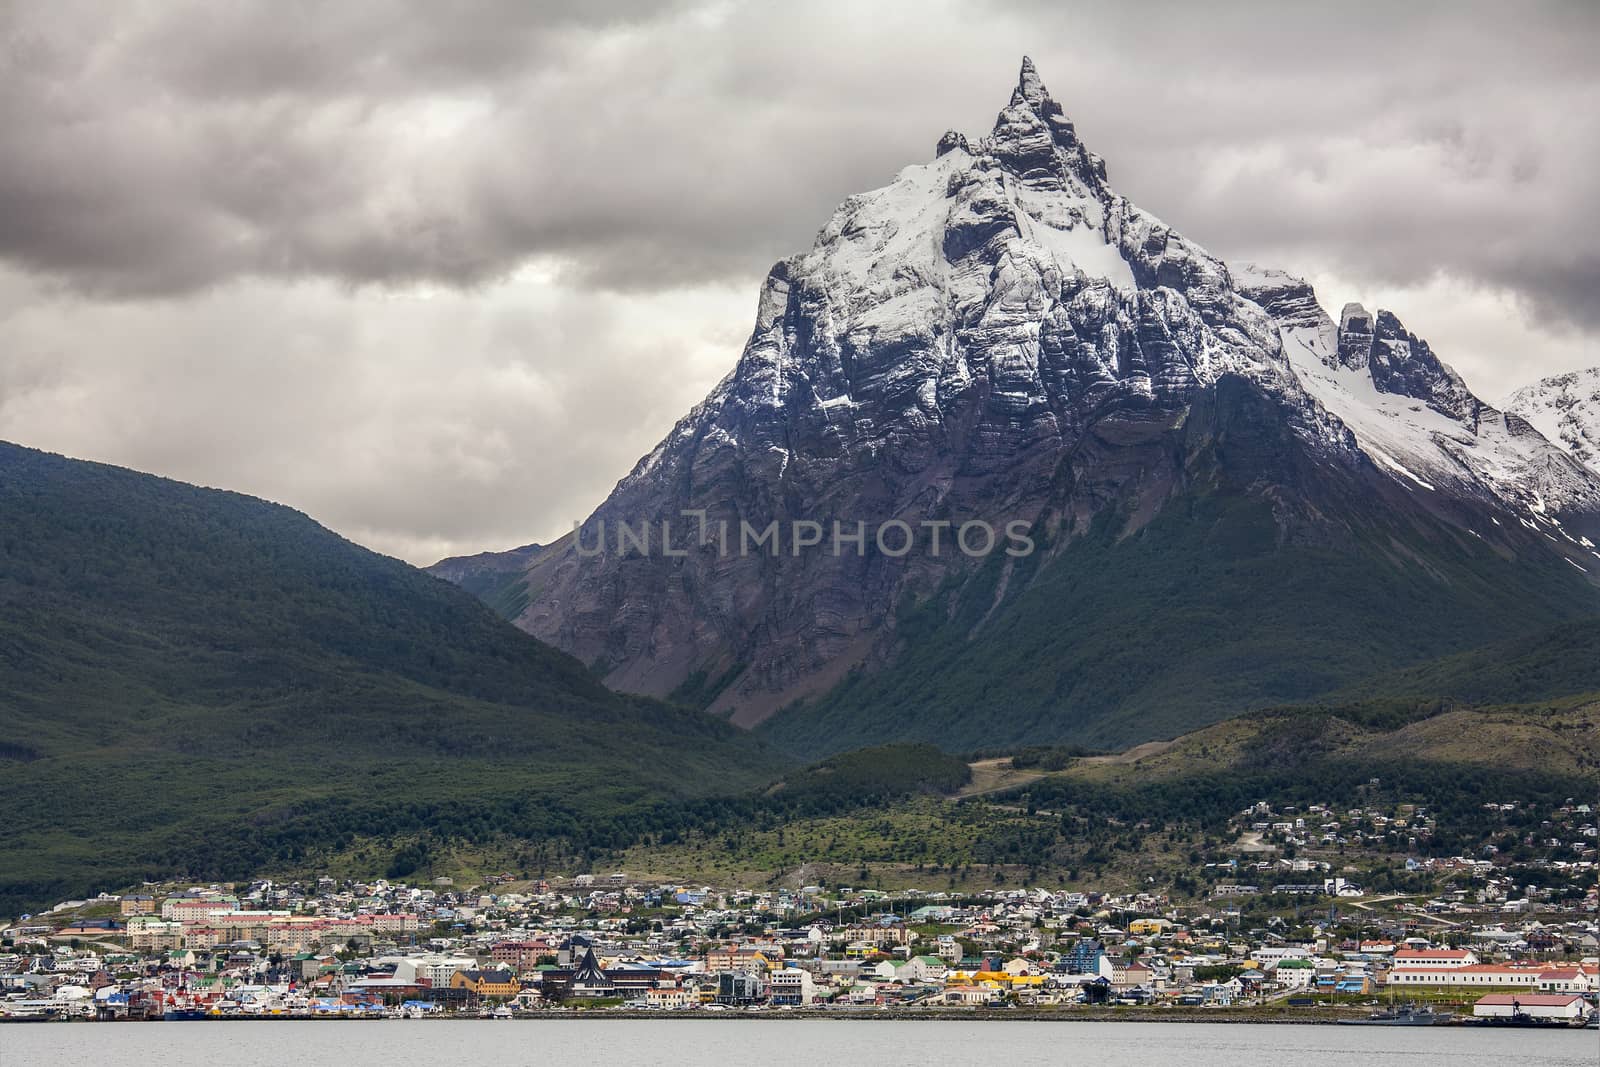 Ushuaia - the capital of Tierra del Fuego in the Antartida e Islas del Atlantico Sur Province of Argentina. It is commonly regarded as the southernmost city in the world.